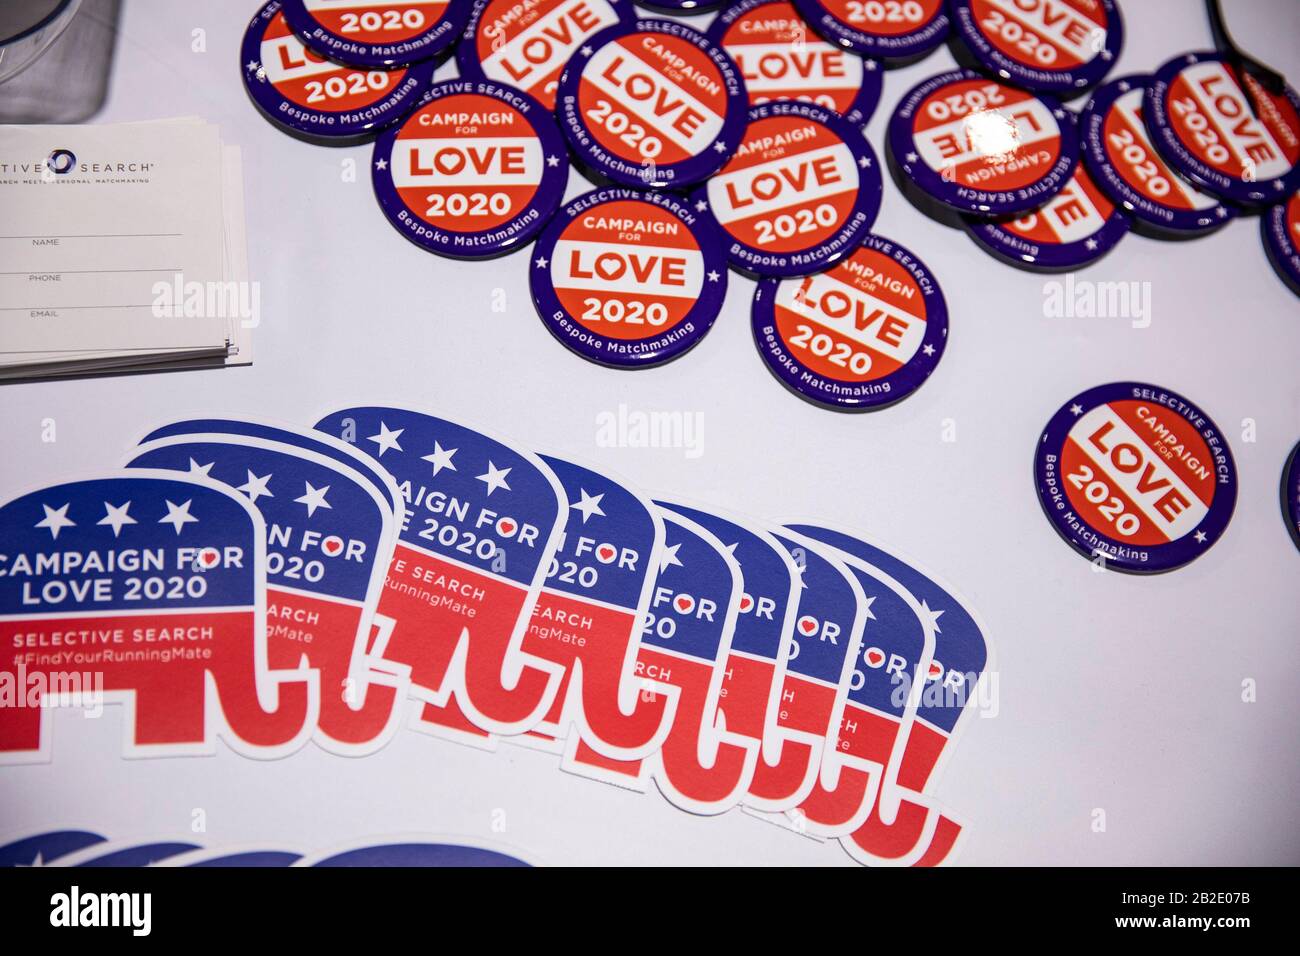 Oxon Hill, Md. 27th Feb, 2020. OXON HILL, Md. - FEBRUARY 27: Sticker and buttons for the company Campaign for Love in their booth at the Conservative Political Action Conference, CPAC 2020, in Oxon Hill, Md., on Thursday, February 27, 2020. Campaign for Love is a bespoke match making service who‚Äôs packages can from anywhere from $50,000 to $500,000.Credit: Samuel Corum/CNP (RESTRICTION: NO New York or New Jersey Newspapers or newspapers within a 75 mile radius of New York City) | usage worldwide Credit: dpa/Alamy Live News Stock Photo